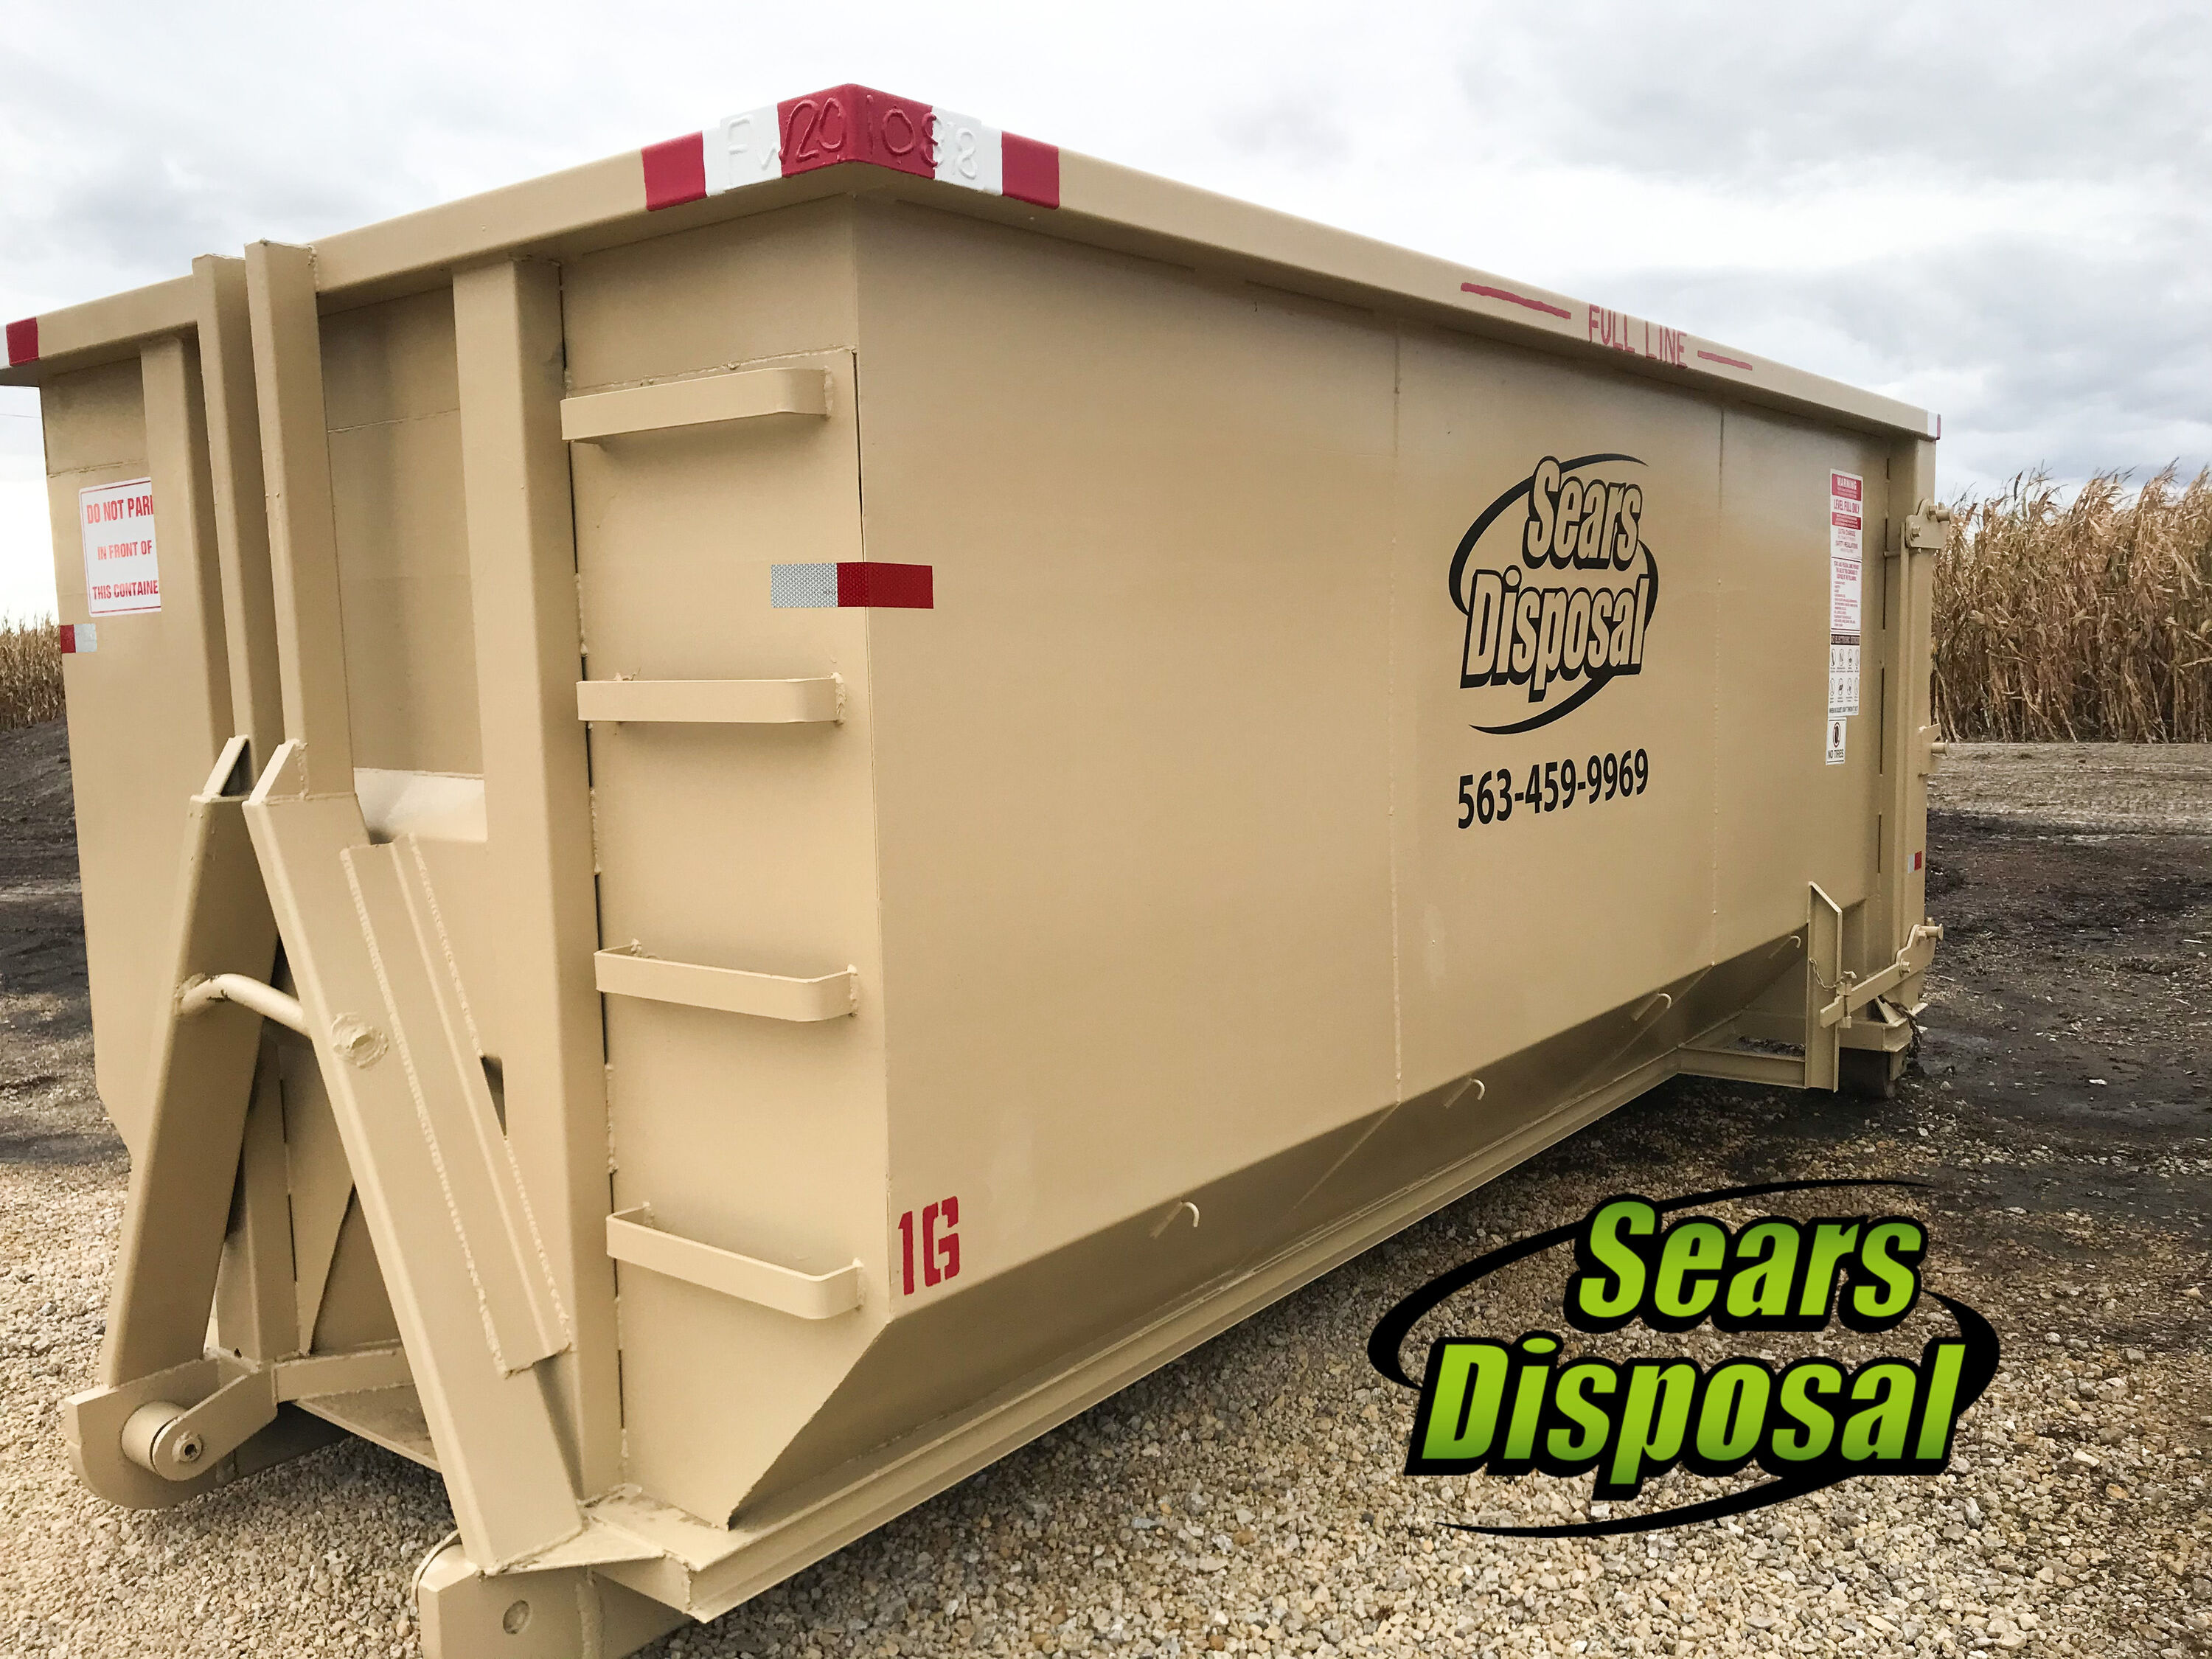  Commercial Roll Off Dumpsters Bettendorf to Keep Your Business Waste-Free